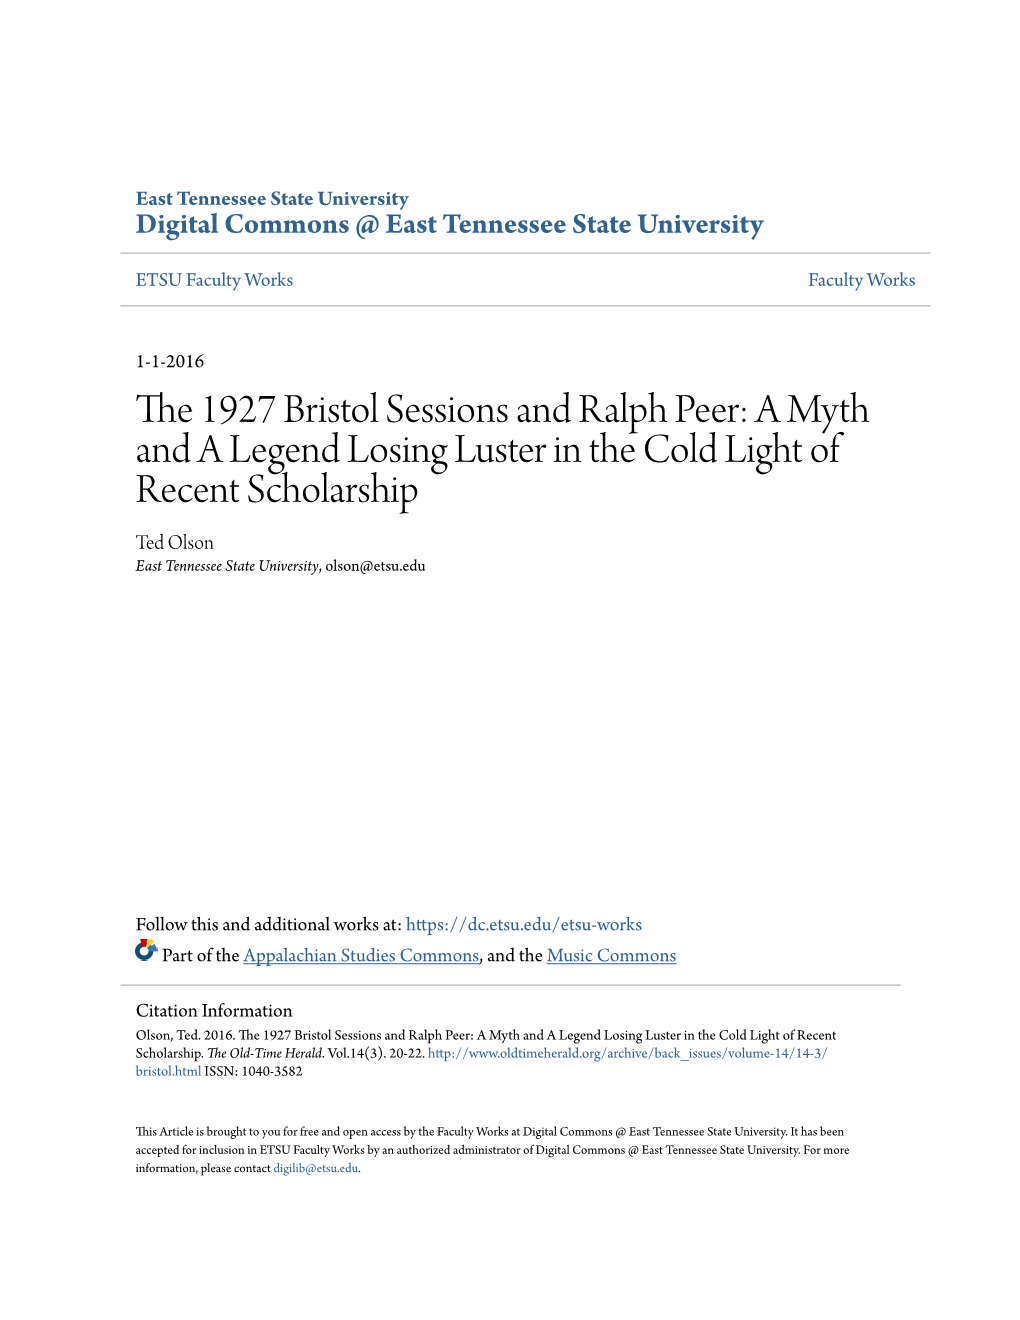 THE 1927 BRISTOL SESSIONS and RALPH PEER: a MYTH and a LEGEND LOSING LUSTER in the COLD LIGHT of RECENT SCHOLARSHIP by Ted Olson